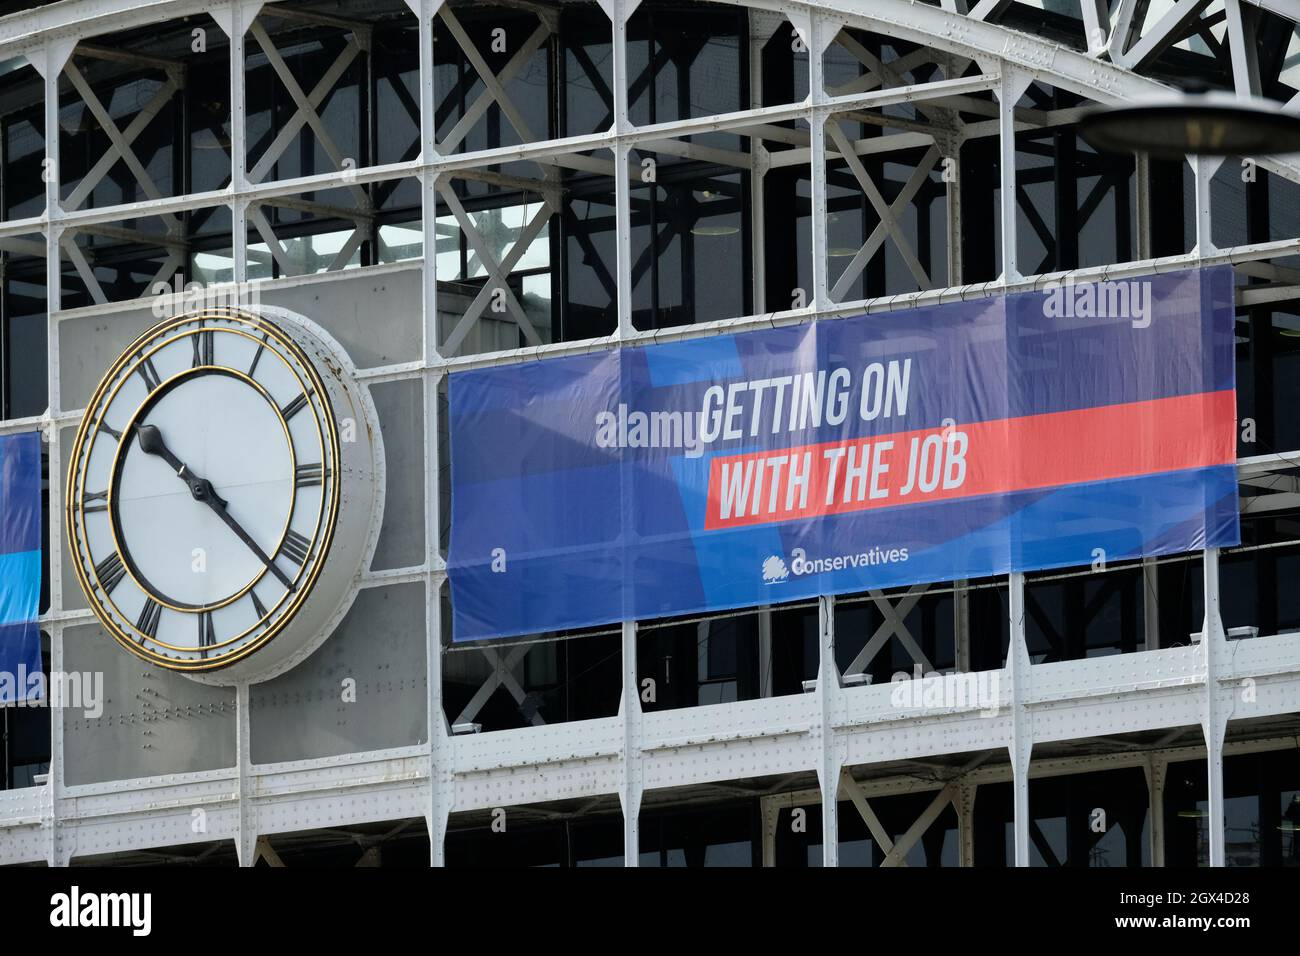 Manchester, Großbritannien – Montag, 4. Oktober 2021 – Getting on with the Job – Conservative Party Conference Slogan auf der Manchester Central Convention Complex. Foto Steven May / Alamy Live News Stockfoto